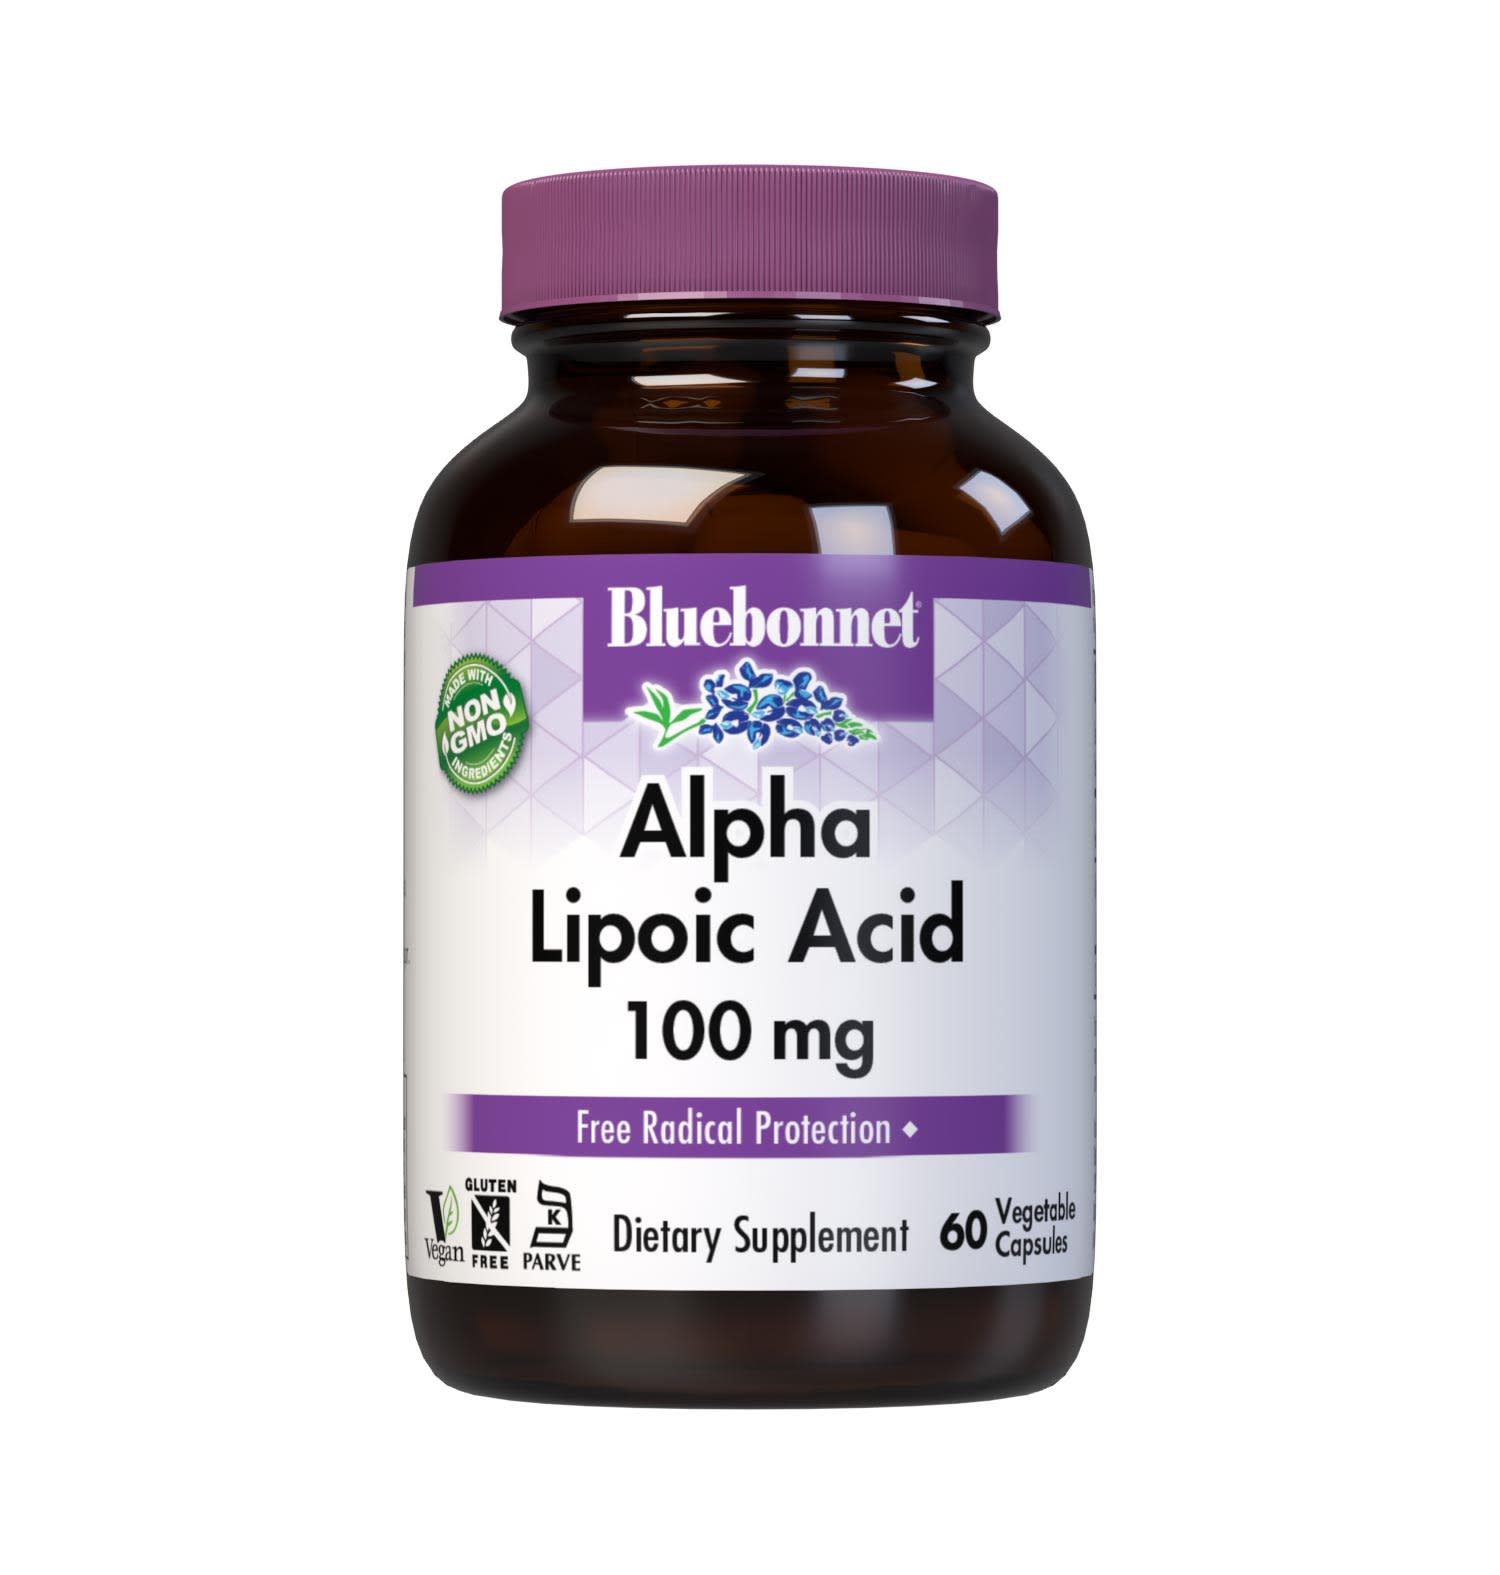 Bluebonnet’s Alpha Lipoic Acid 100 mg 60 Vegetable Capsules are formulated with alpha lipoic acid from thiotic acid. Alpha lipoic acid is a unique fat-soluble and water-soluble nutrient that is known for its free radical scavenger activity. #size_60 count